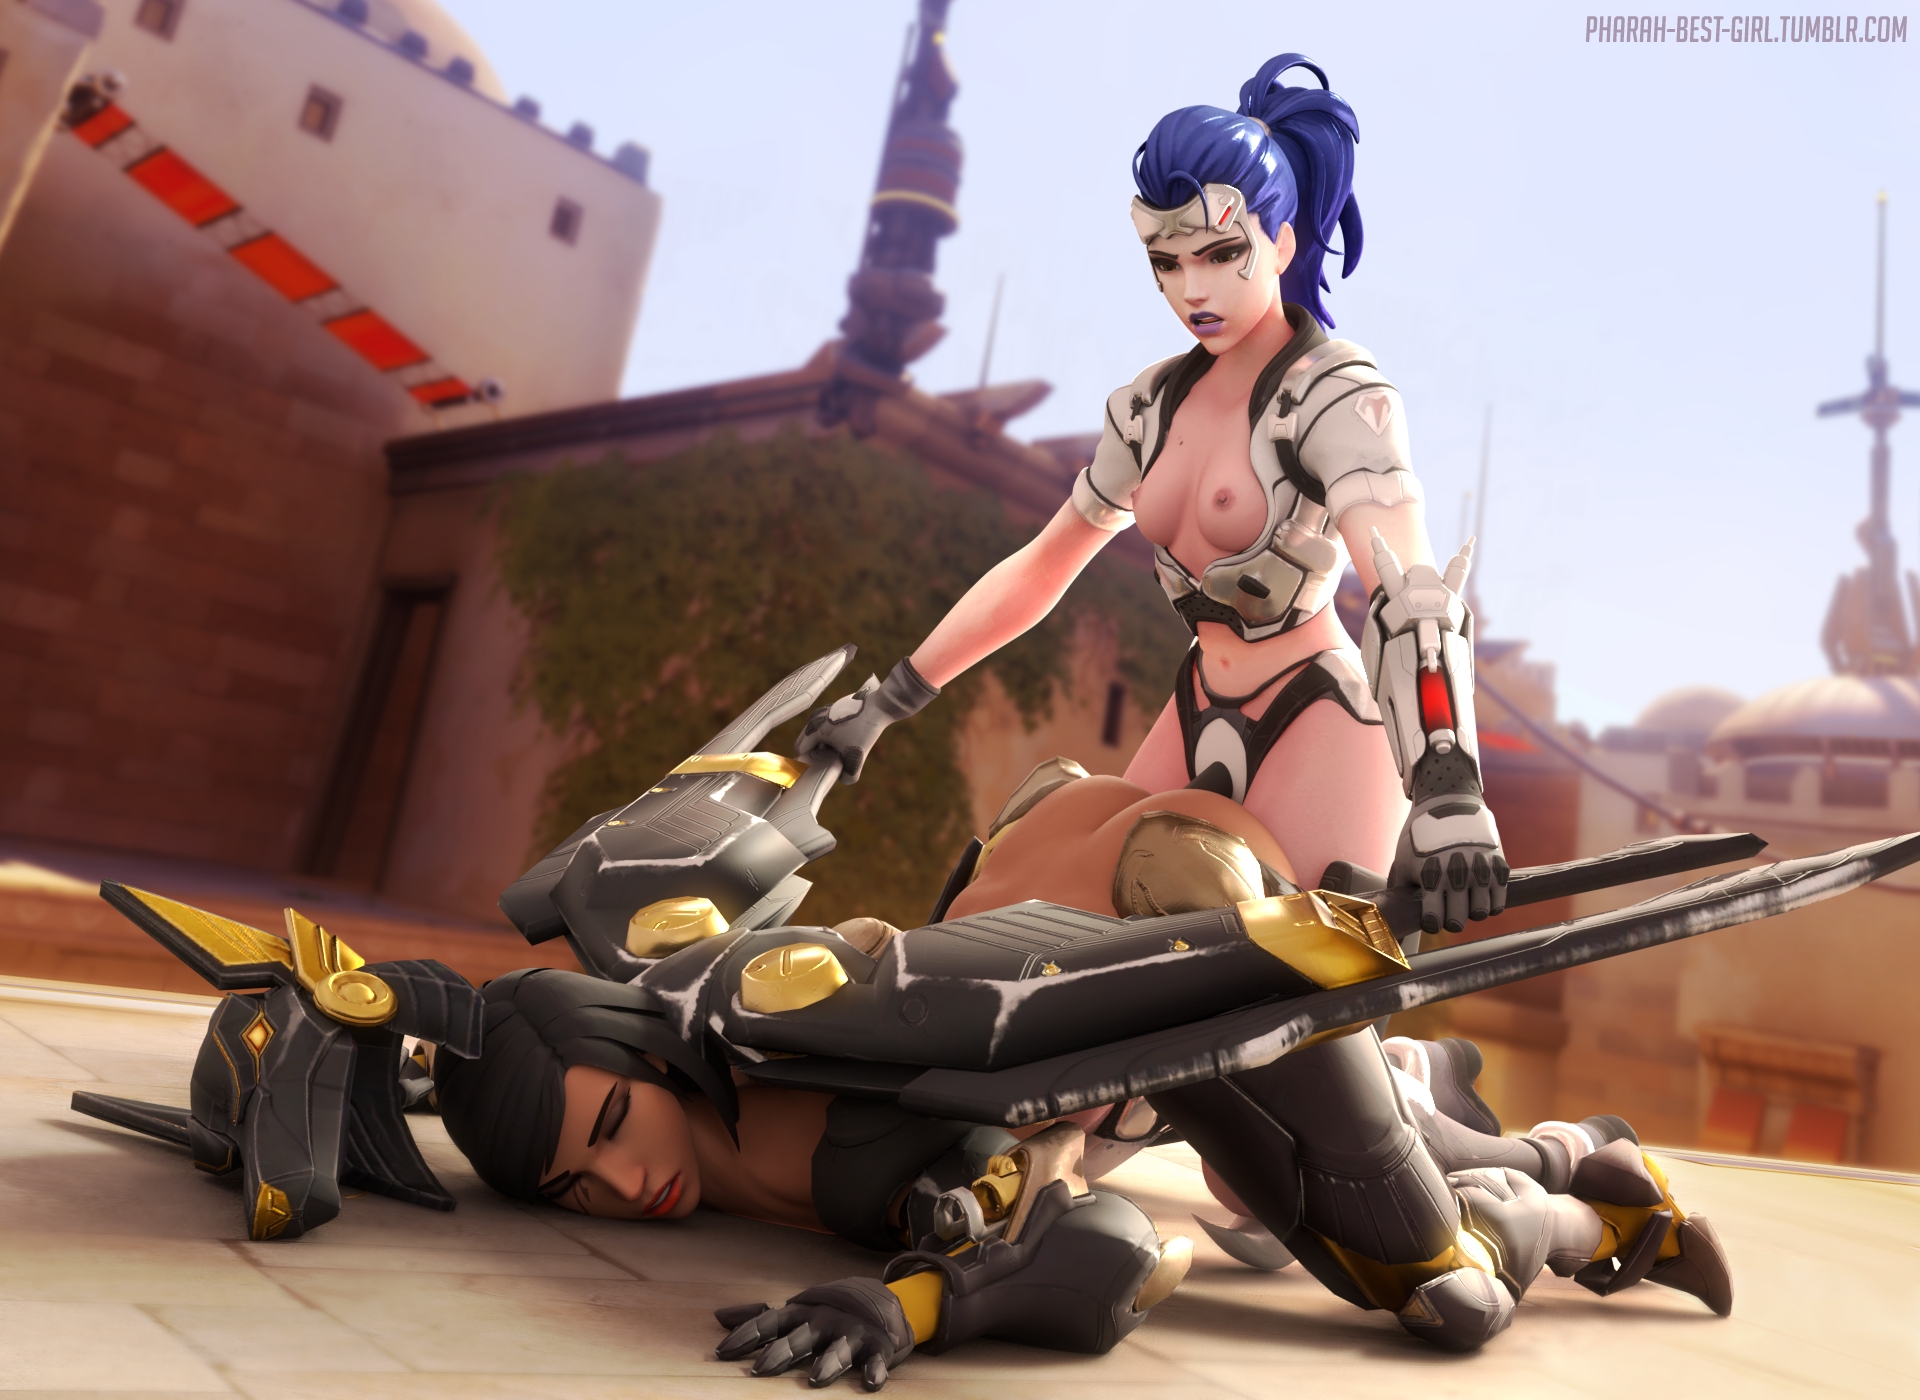 Shot down Pharah Overwatch 3d Porn Sexy Lesbian Natural Boobs Strapon Bent Over Doggy Style Fuck From Behind